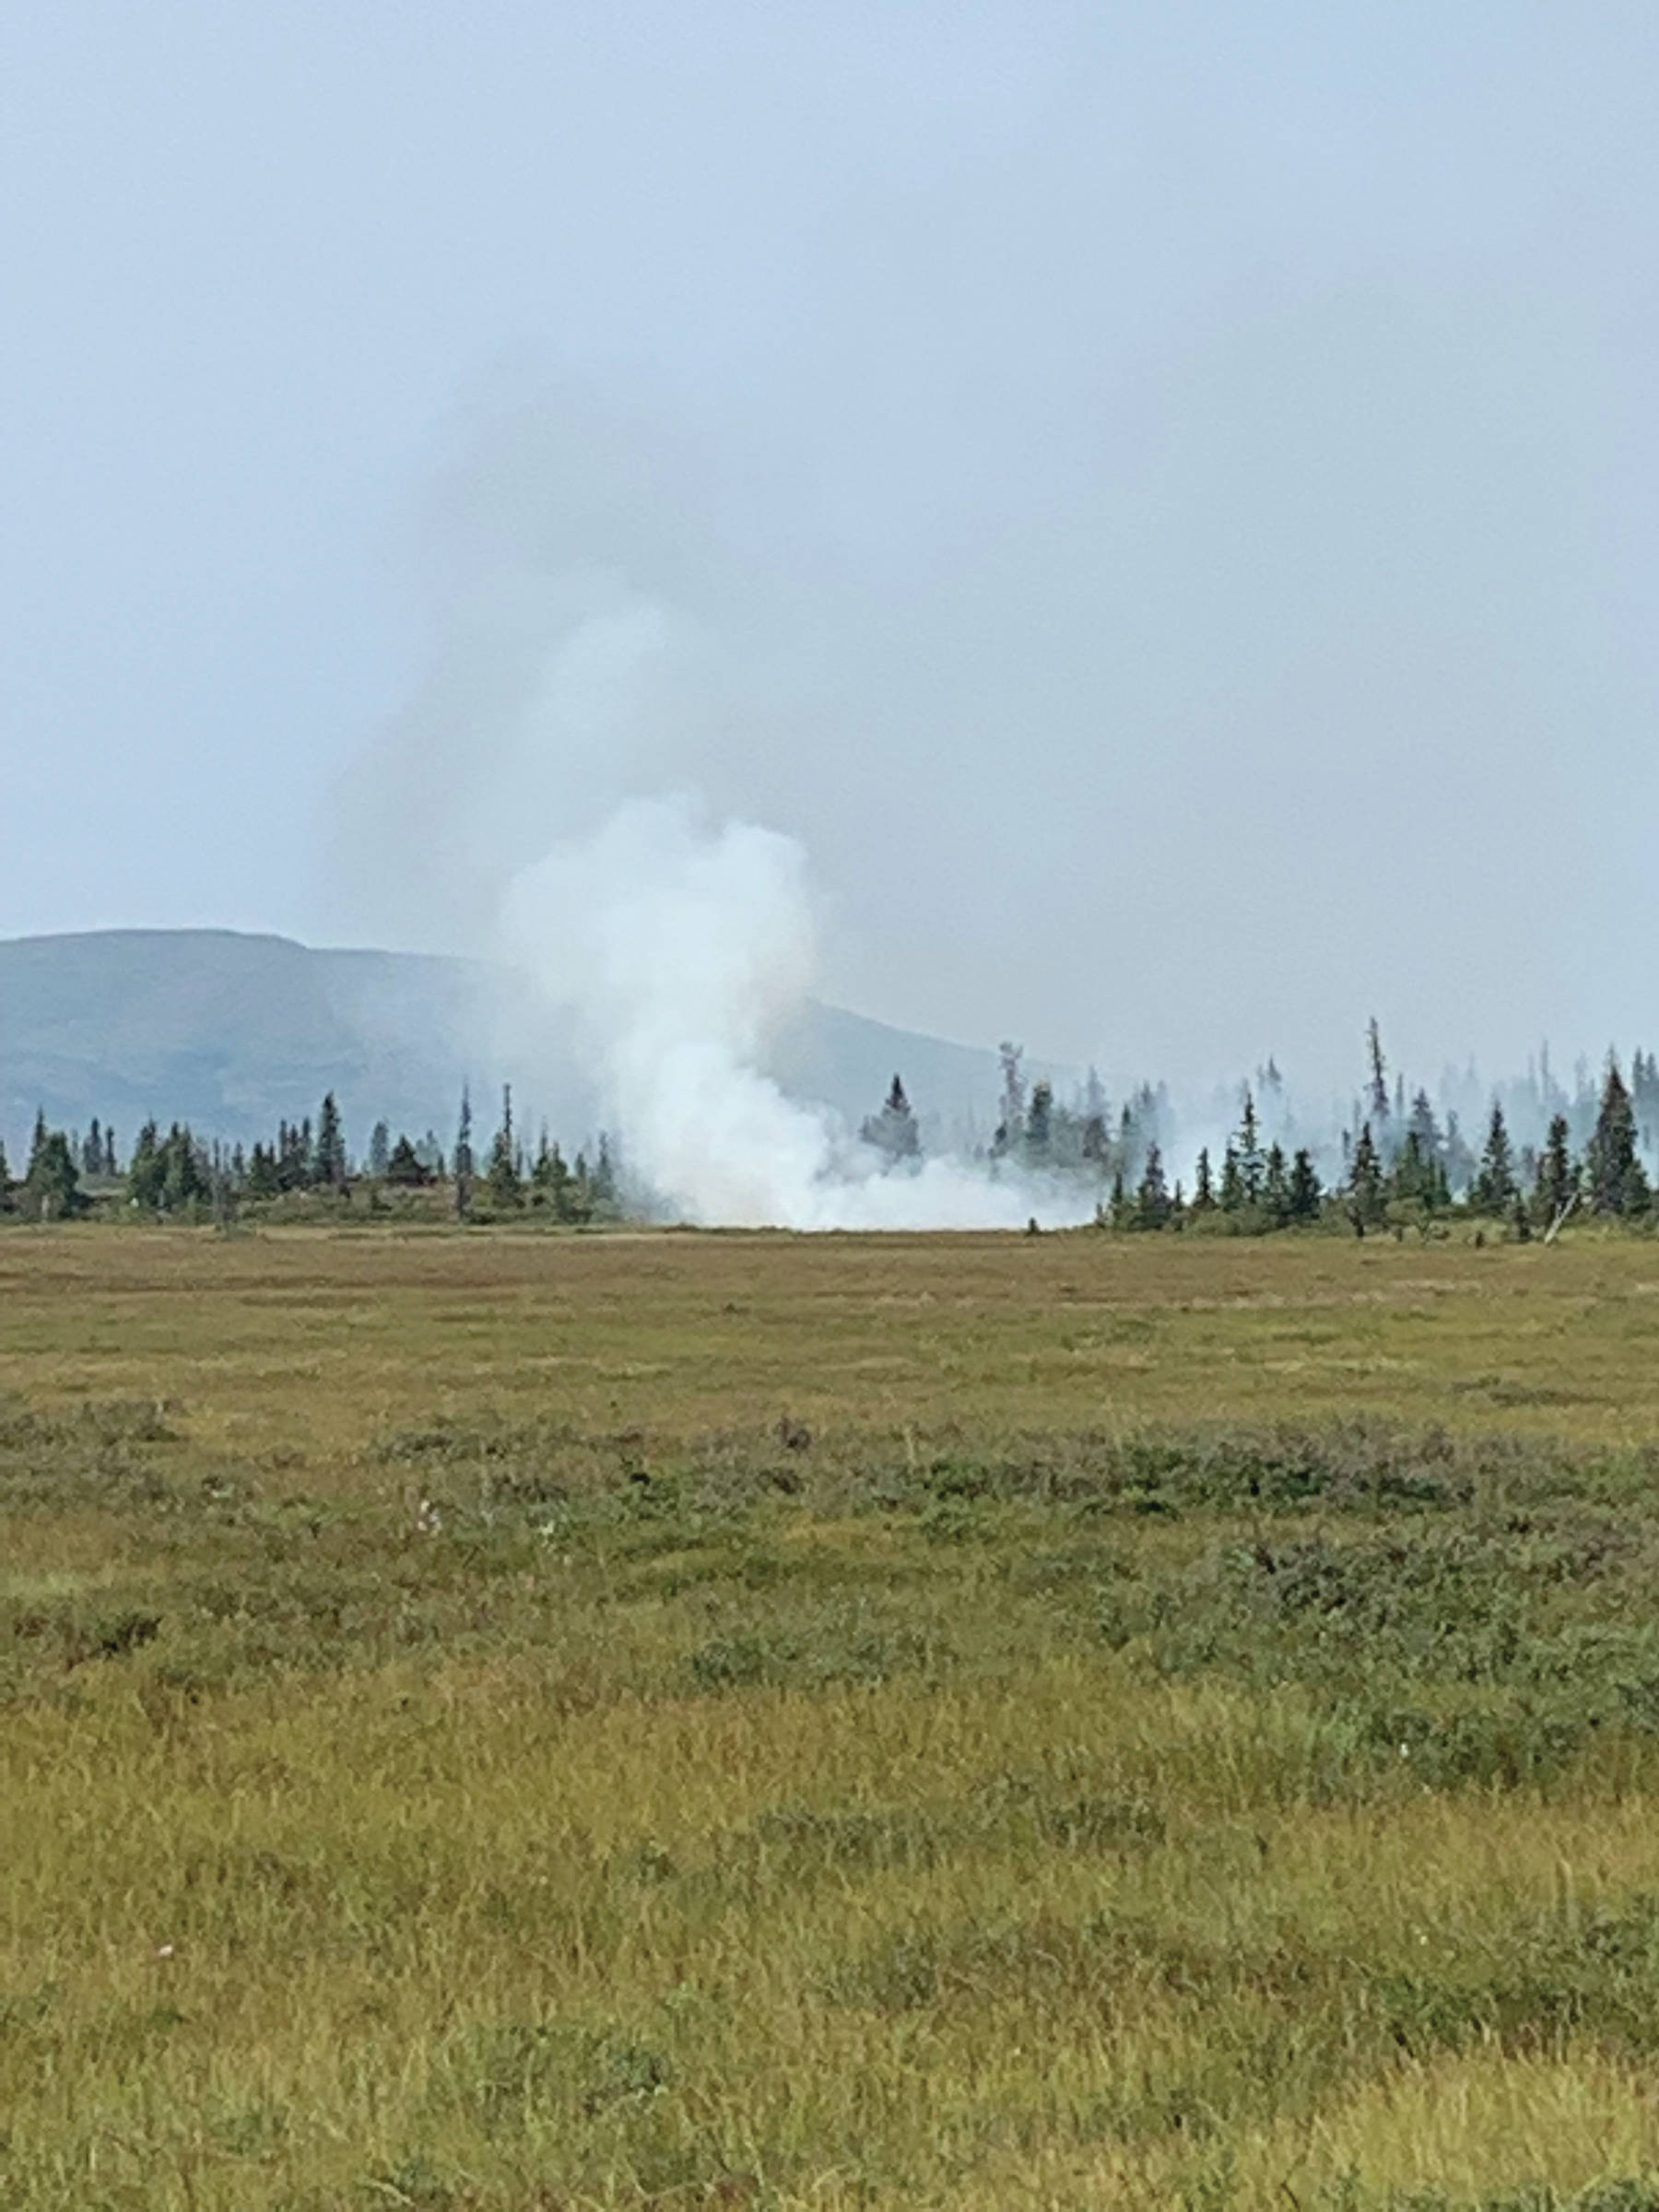 This photo of the Caribou Lake fire was taken about 2 p.m. Monday, Aug. 19, 2019, northeast of Homer, Alaska, whenr Ian Pitzman texted a message reporting the fire to his wife, Stephanie Pitzman, via an inReach satellite communication device. (Photo by Ian Pitzman)